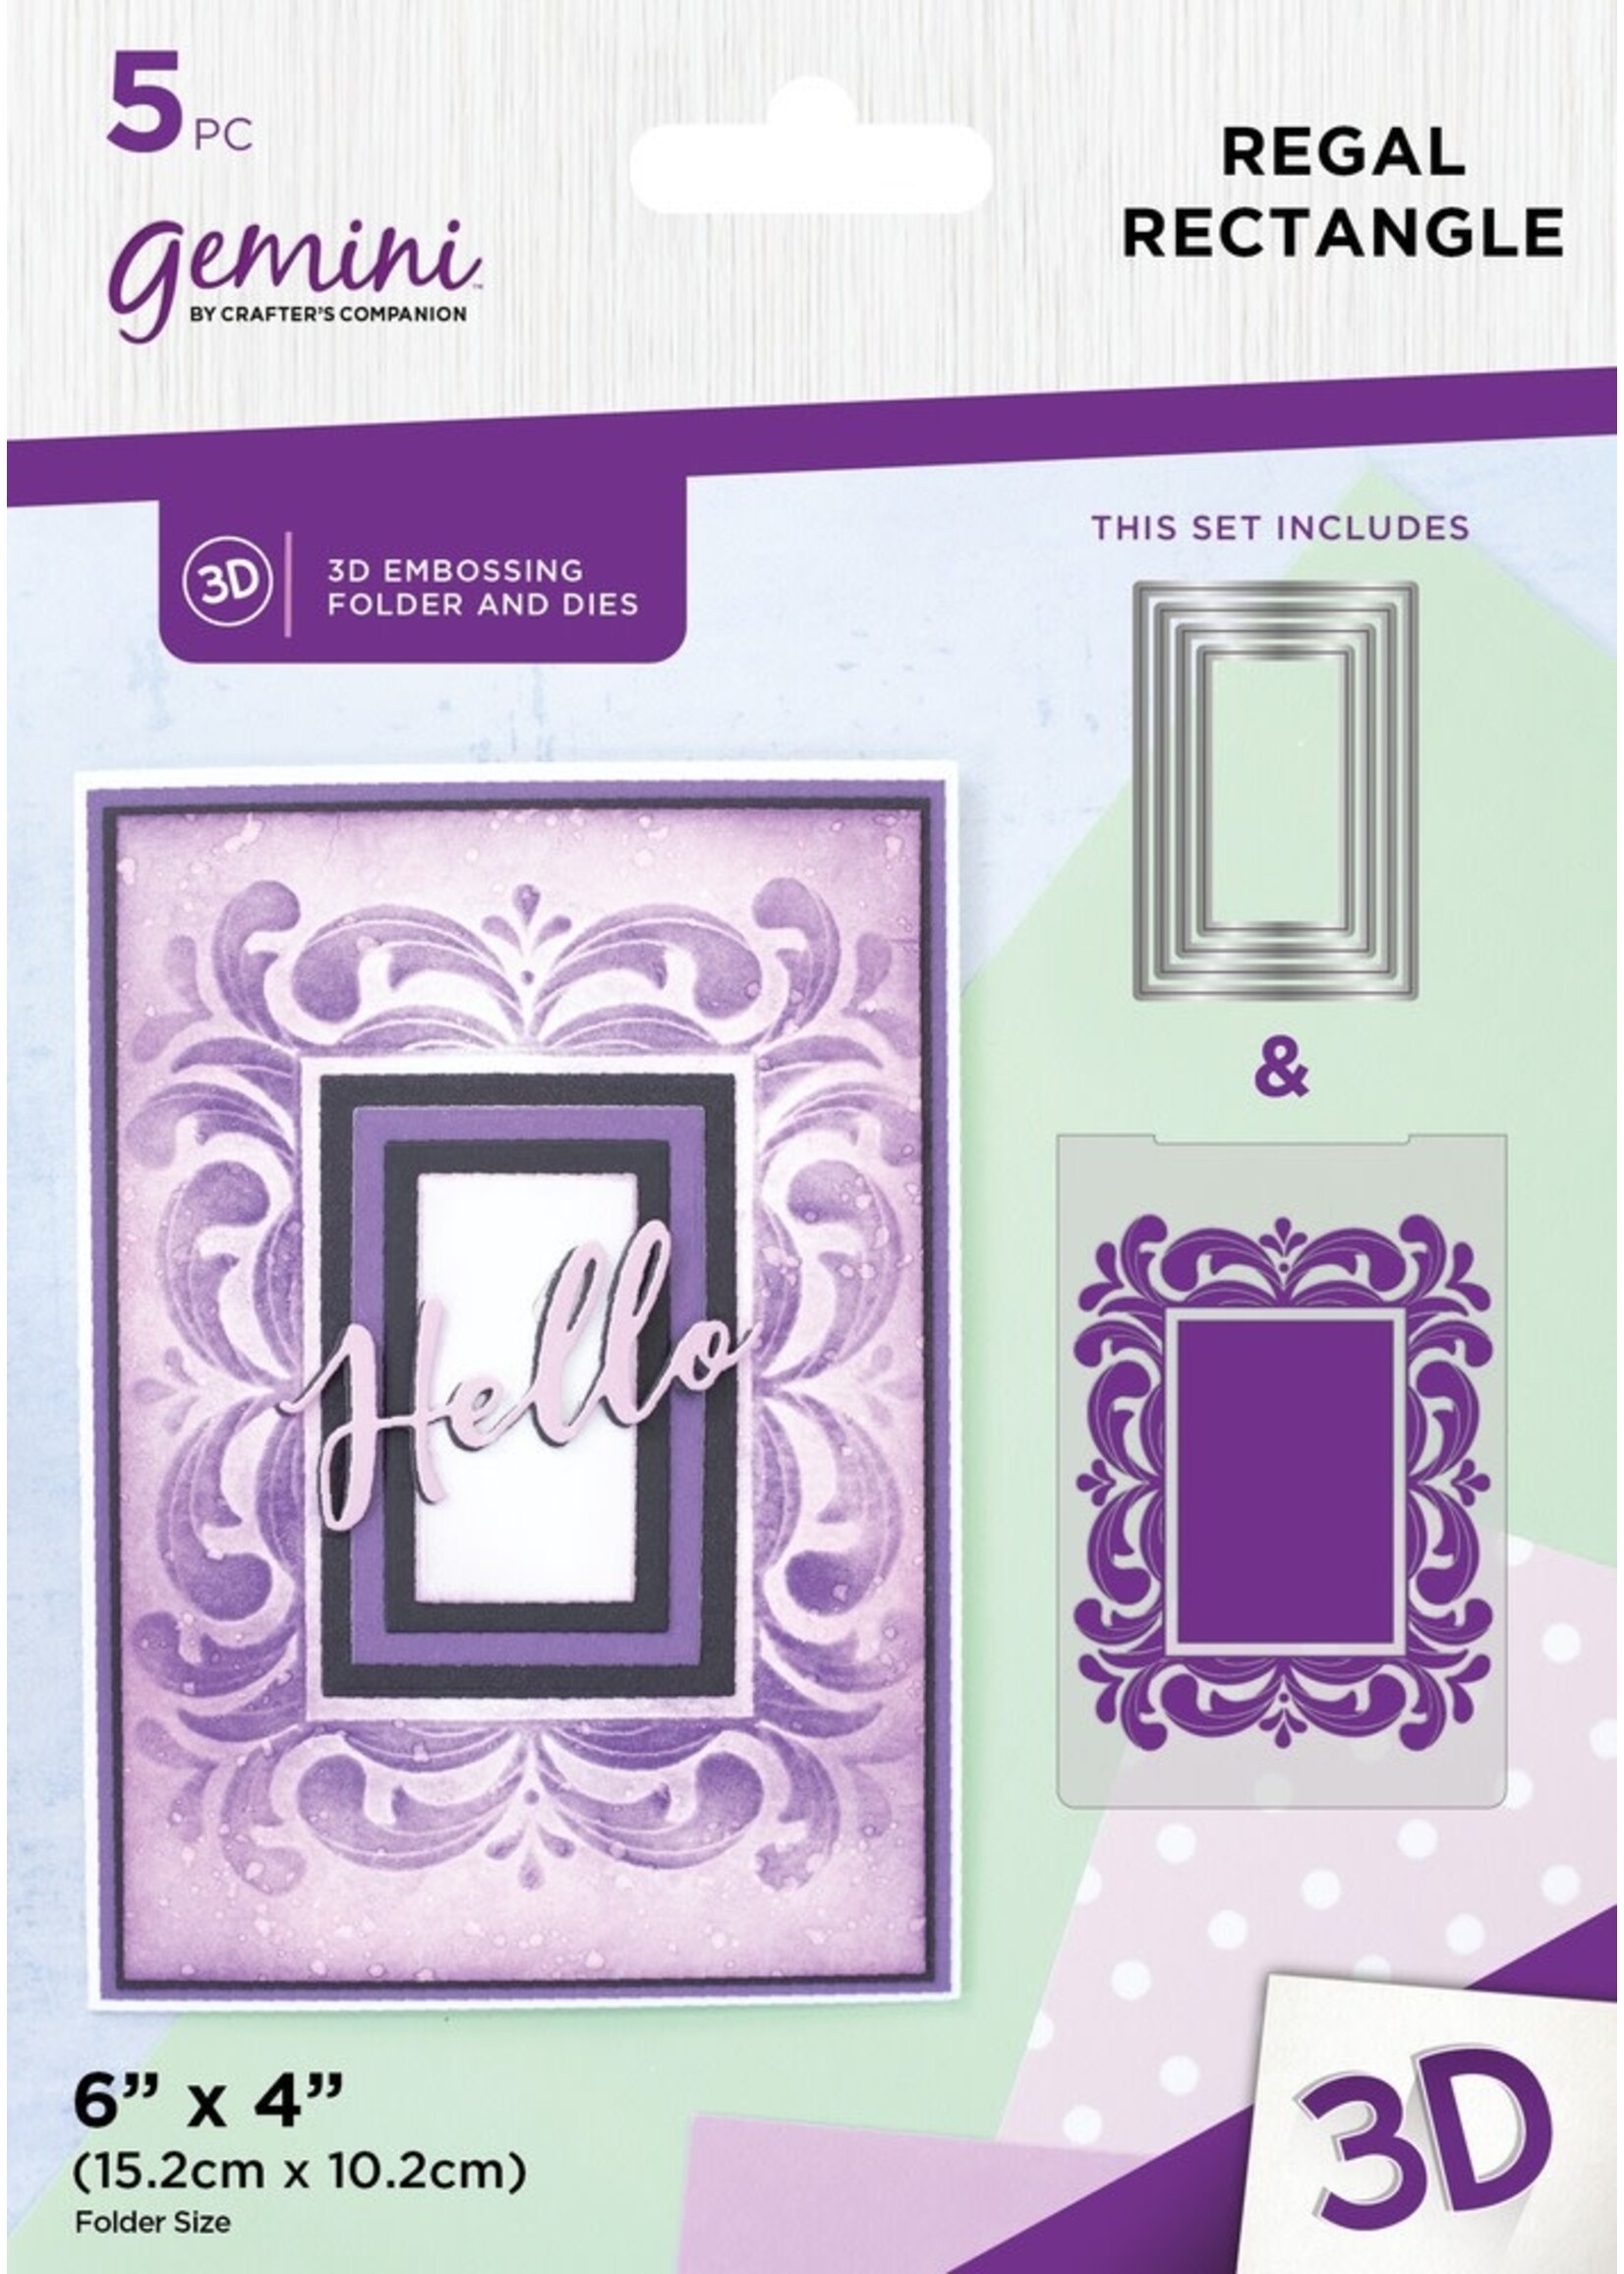 Crafter's Companion 3D Embossing Folder & Dies, Regal Rectangle